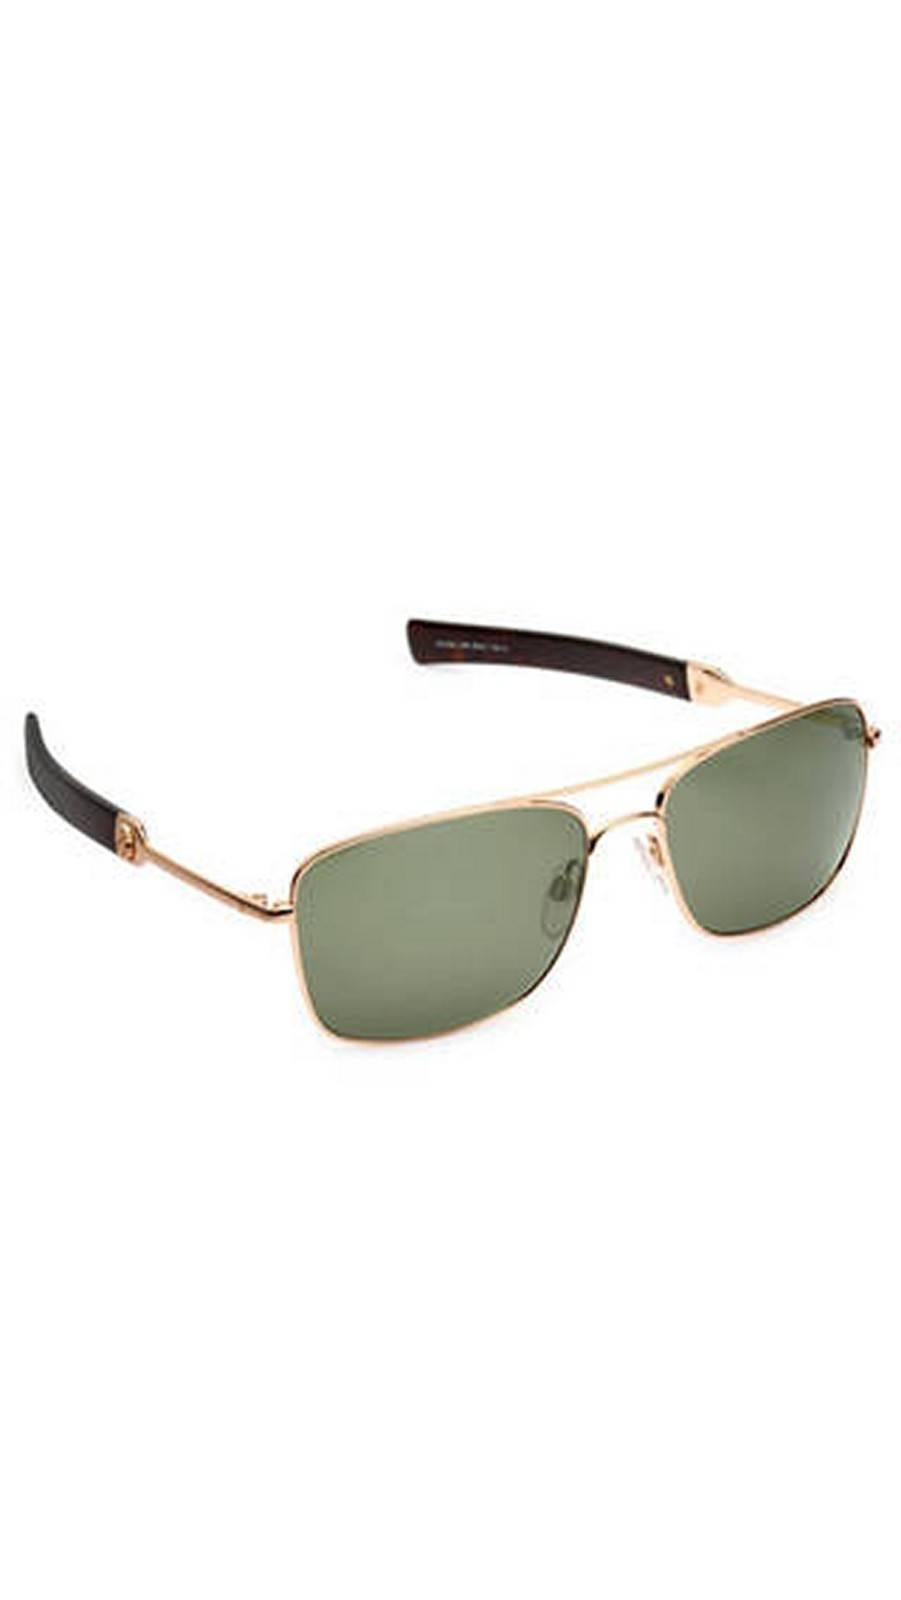 Roberto Cavalli RC1020-28N-59 Metal Gold Rose Havana - Green Sunglasses In New Condition For Sale In Los Angeles, CA